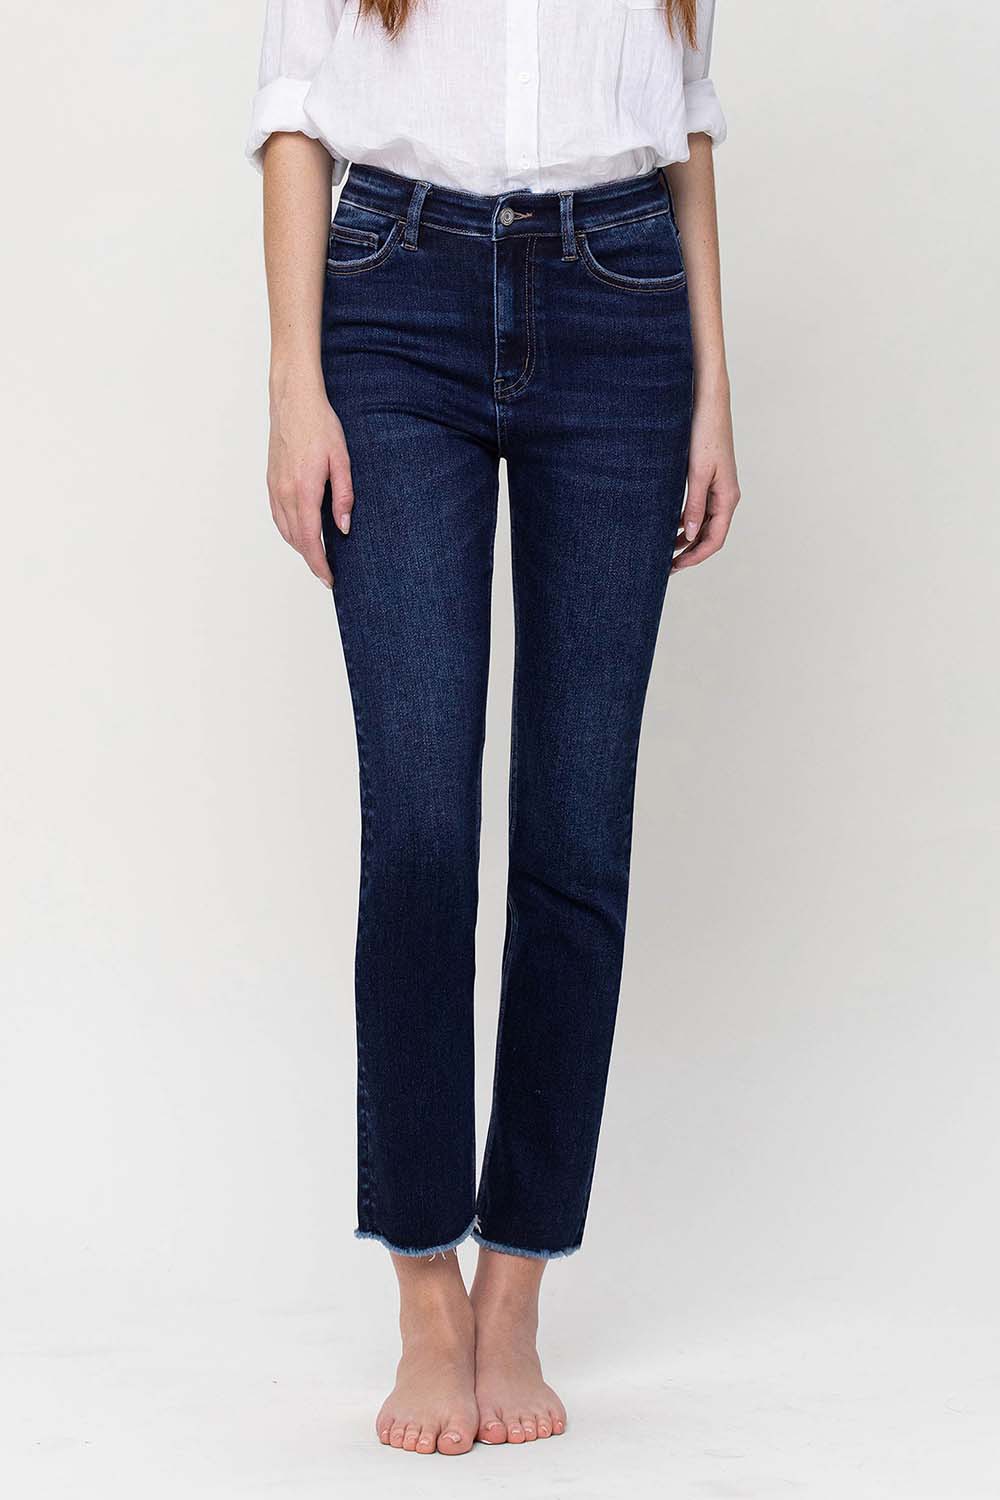 Super High Rise Stretch Slim Straight Jeans-190 Denim-Vervet-Coastal Bloom Boutique, find the trendiest versions of the popular styles and looks Located in Indialantic, FL